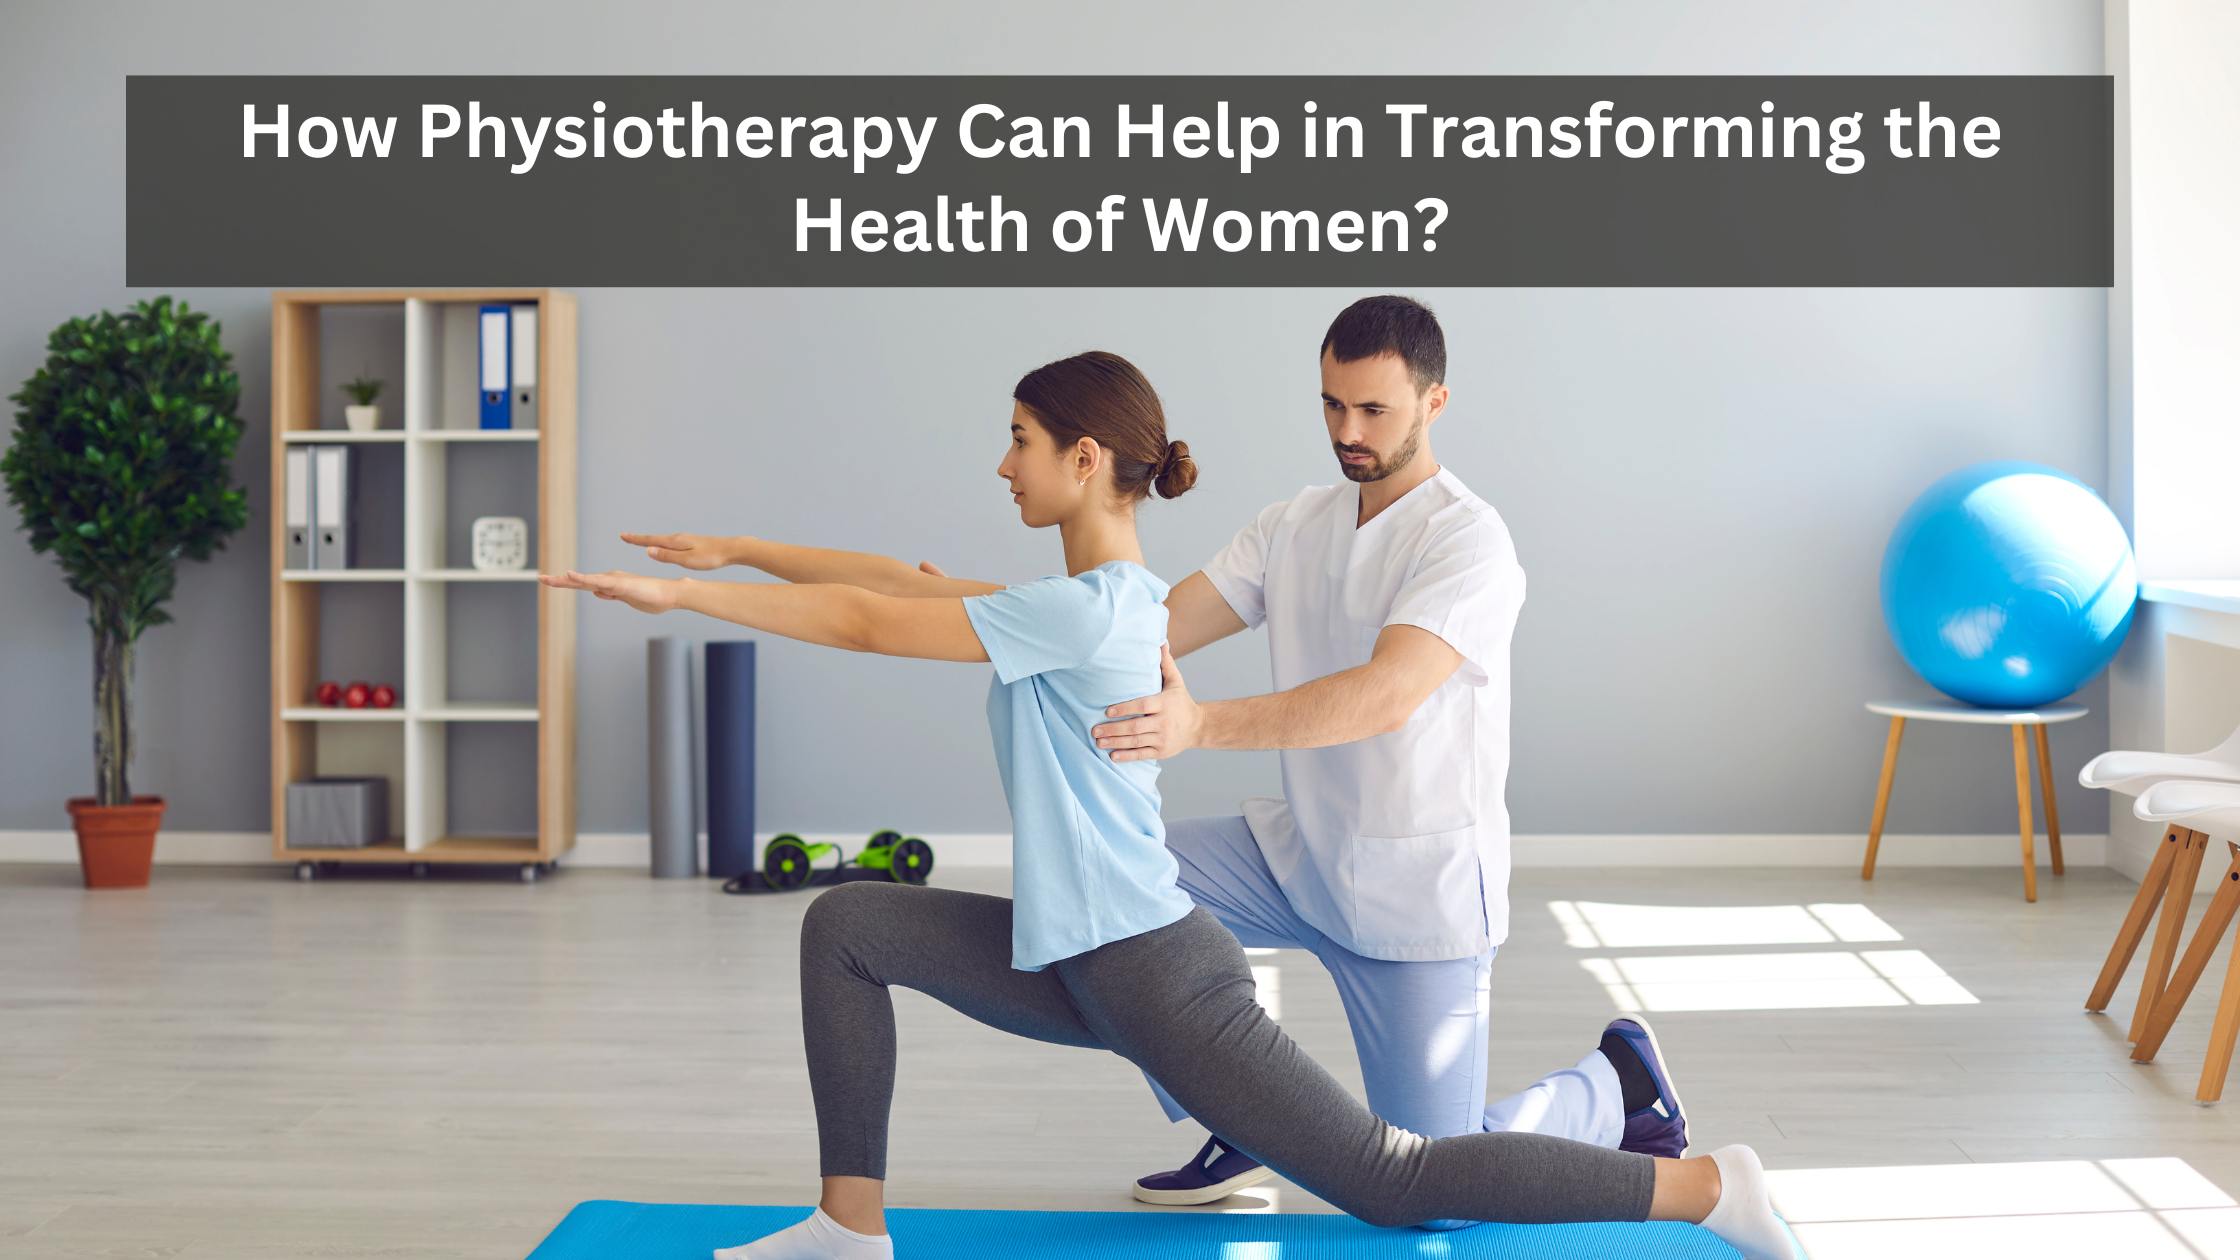 How Physiotherapy Can Help in Transforming the Health of Women?